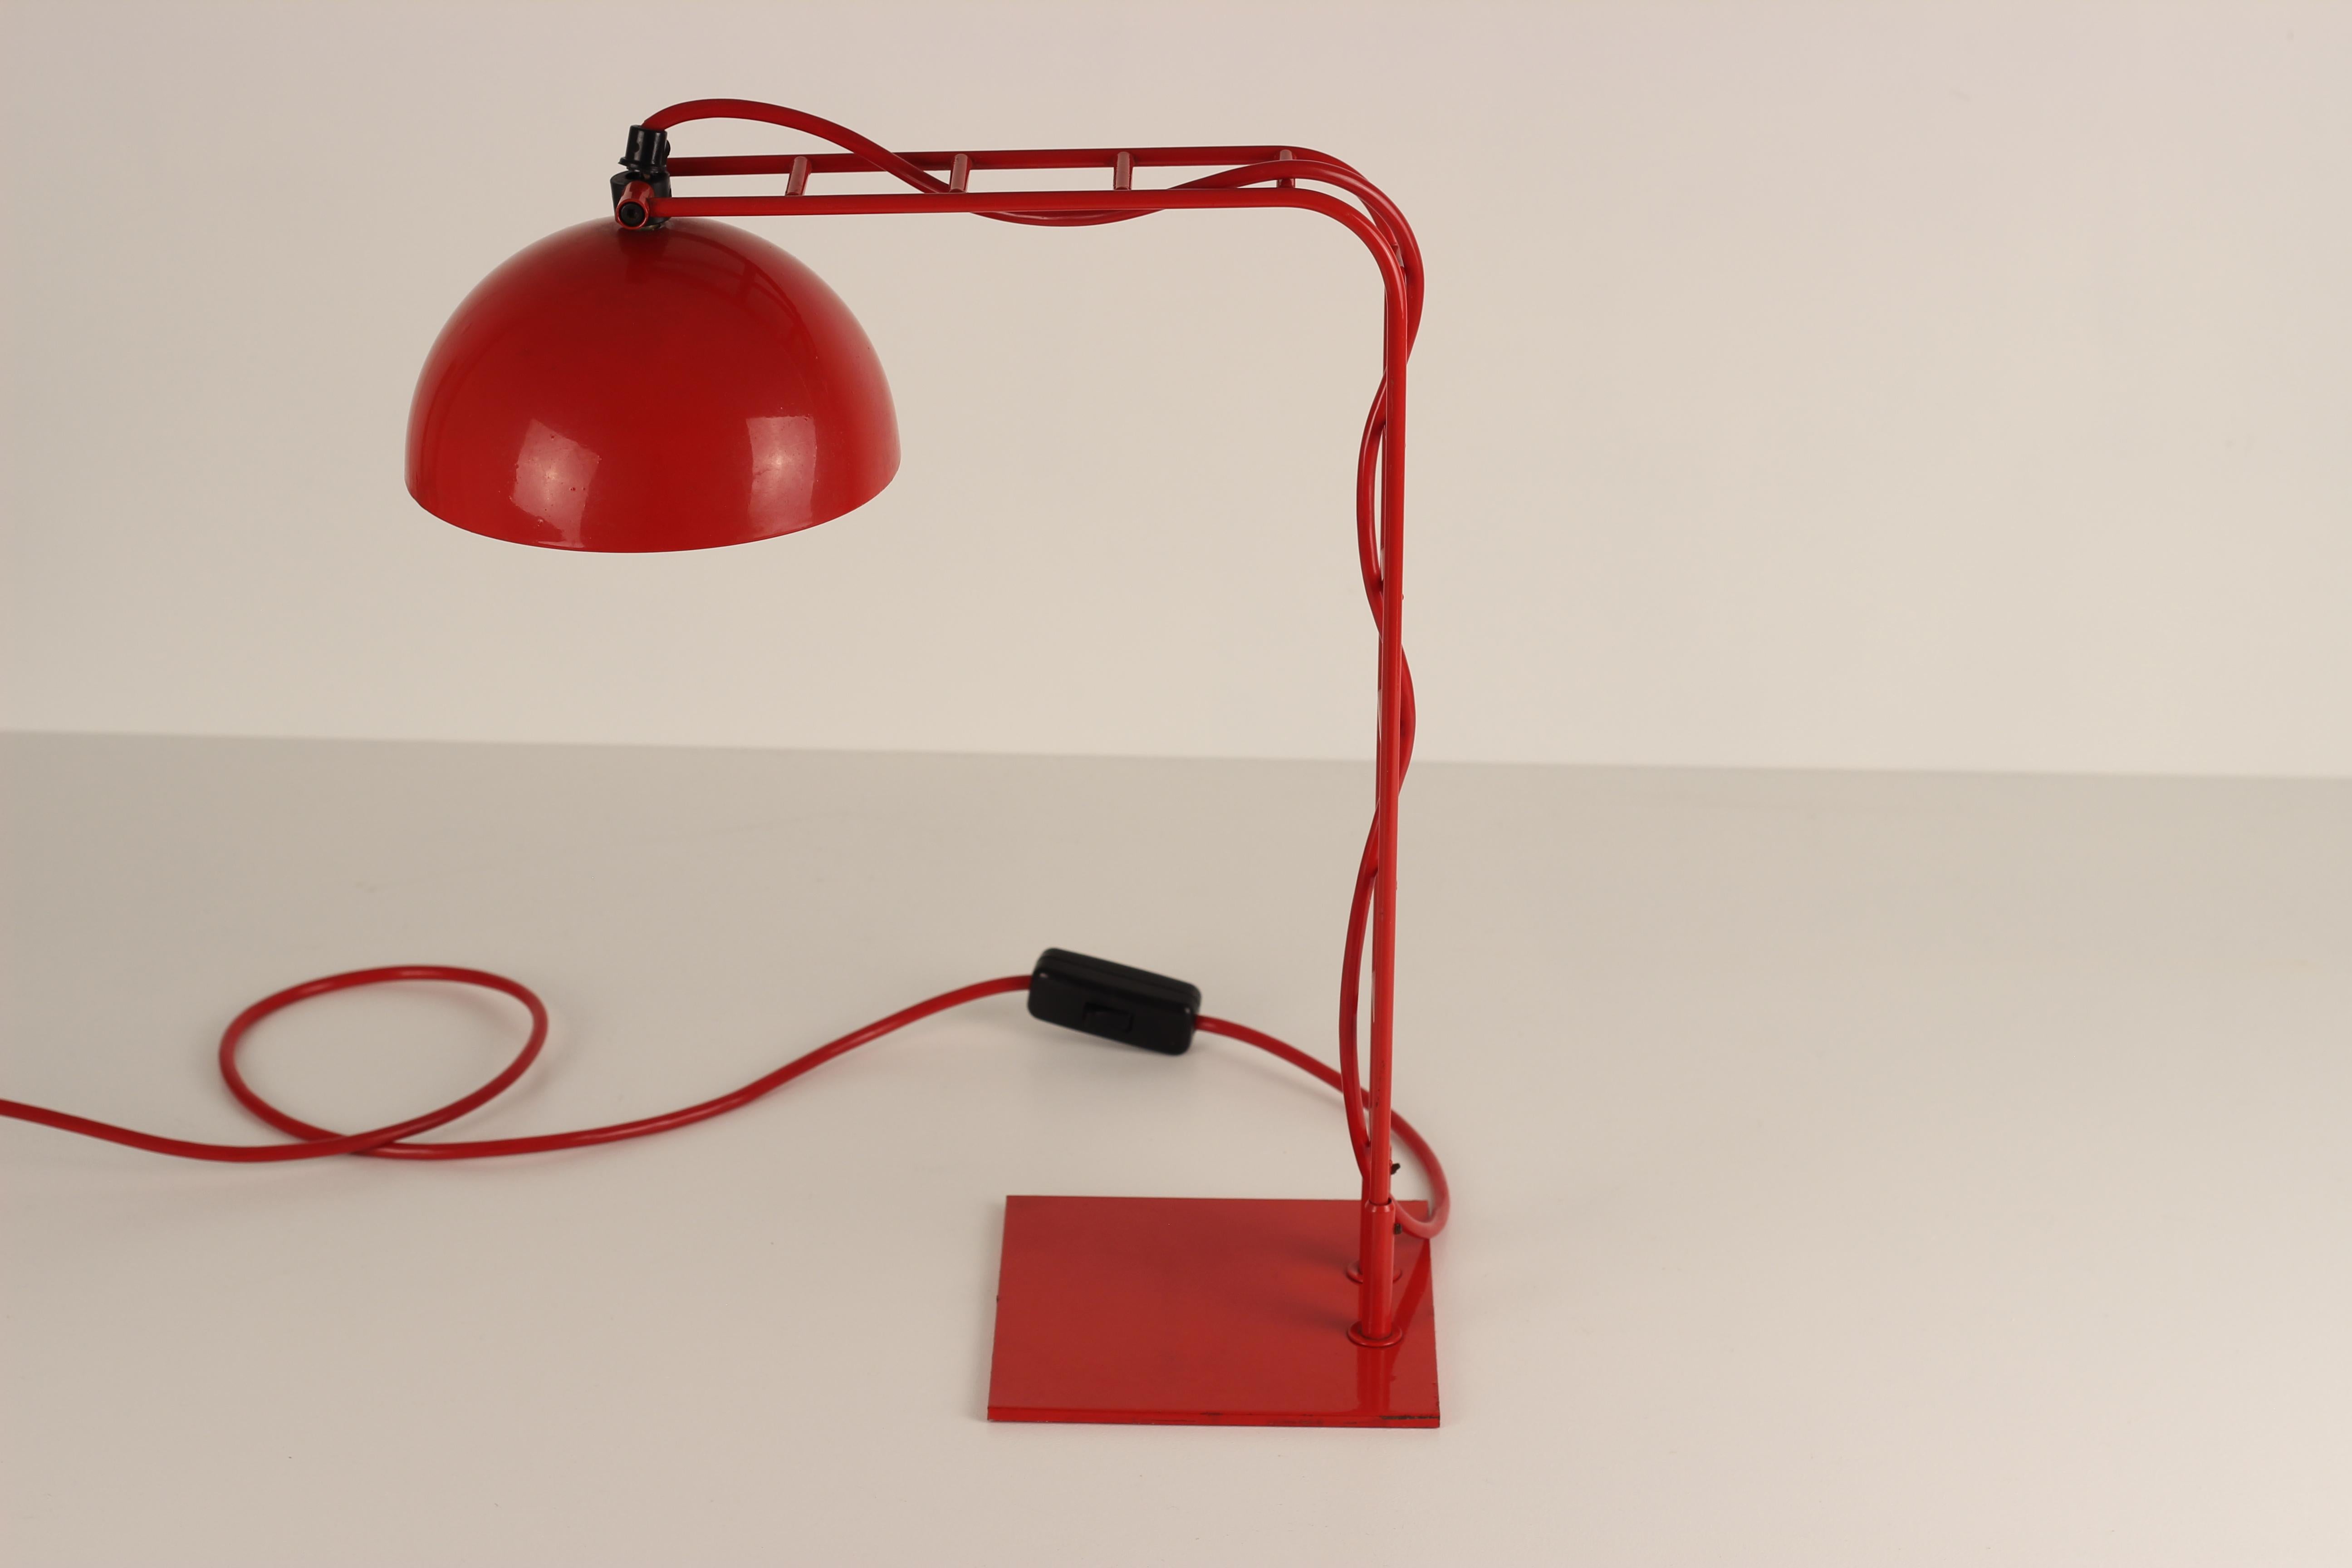 Mid-20th Century Space Age Red Ladder Desk Lamp 1960’s from the Lord Robert Boothby Estate  For Sale